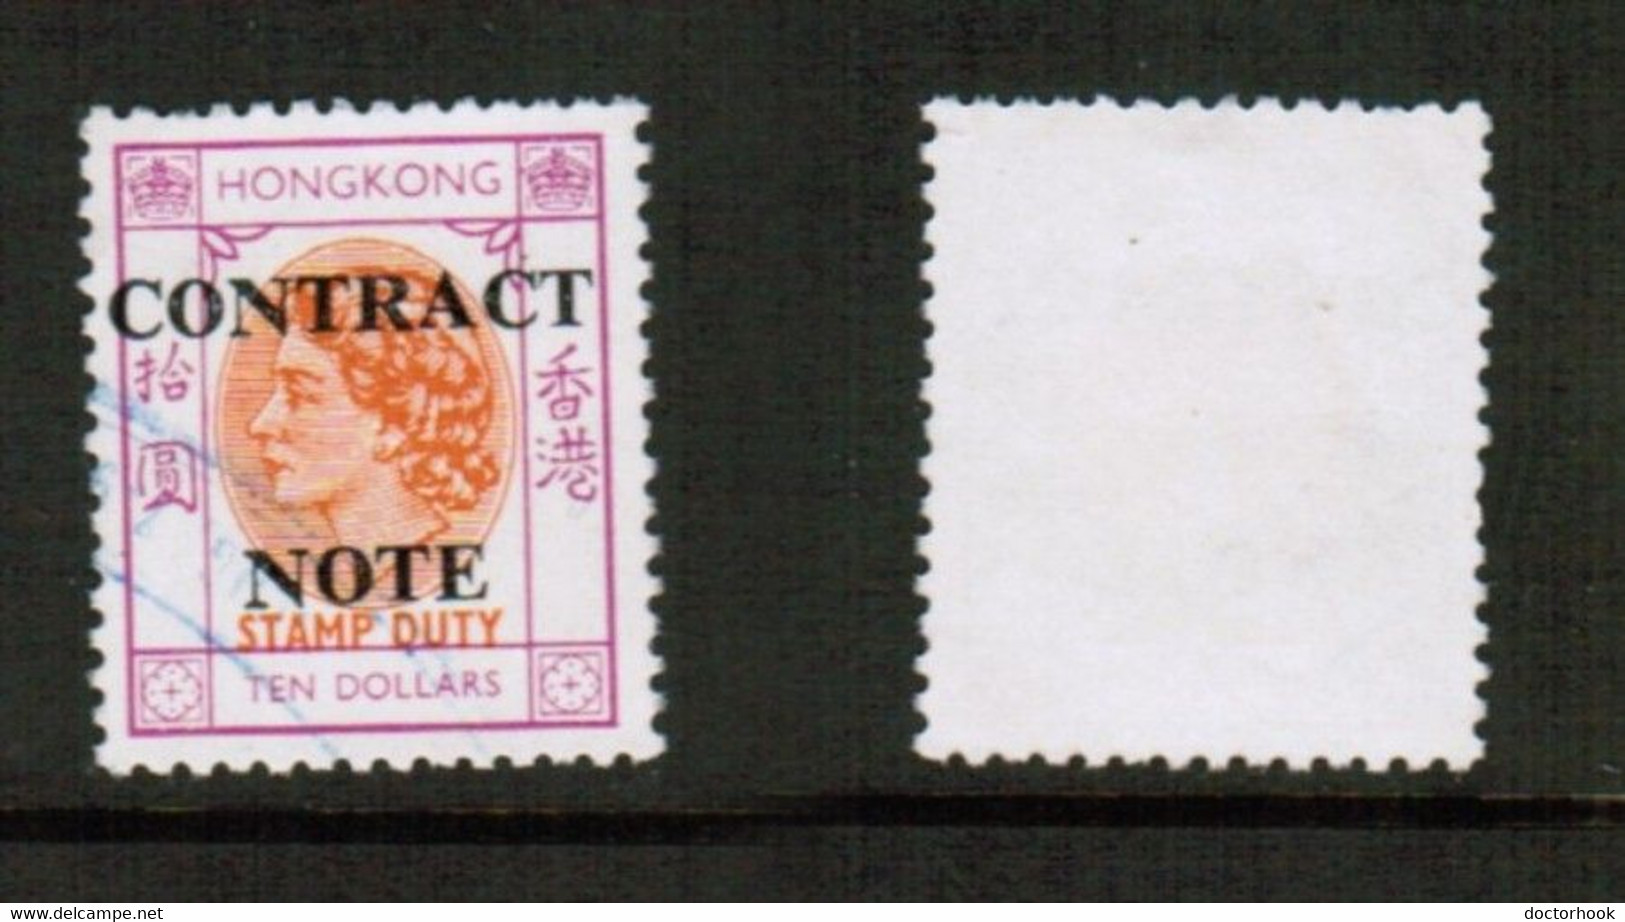 HONG KONG   $10.00 DOLLAR CONTRACT NOTE FISCAL USED (CONDITION AS PER SCAN) (Stamp Scan # 828-17) - Timbres Fiscaux-postaux